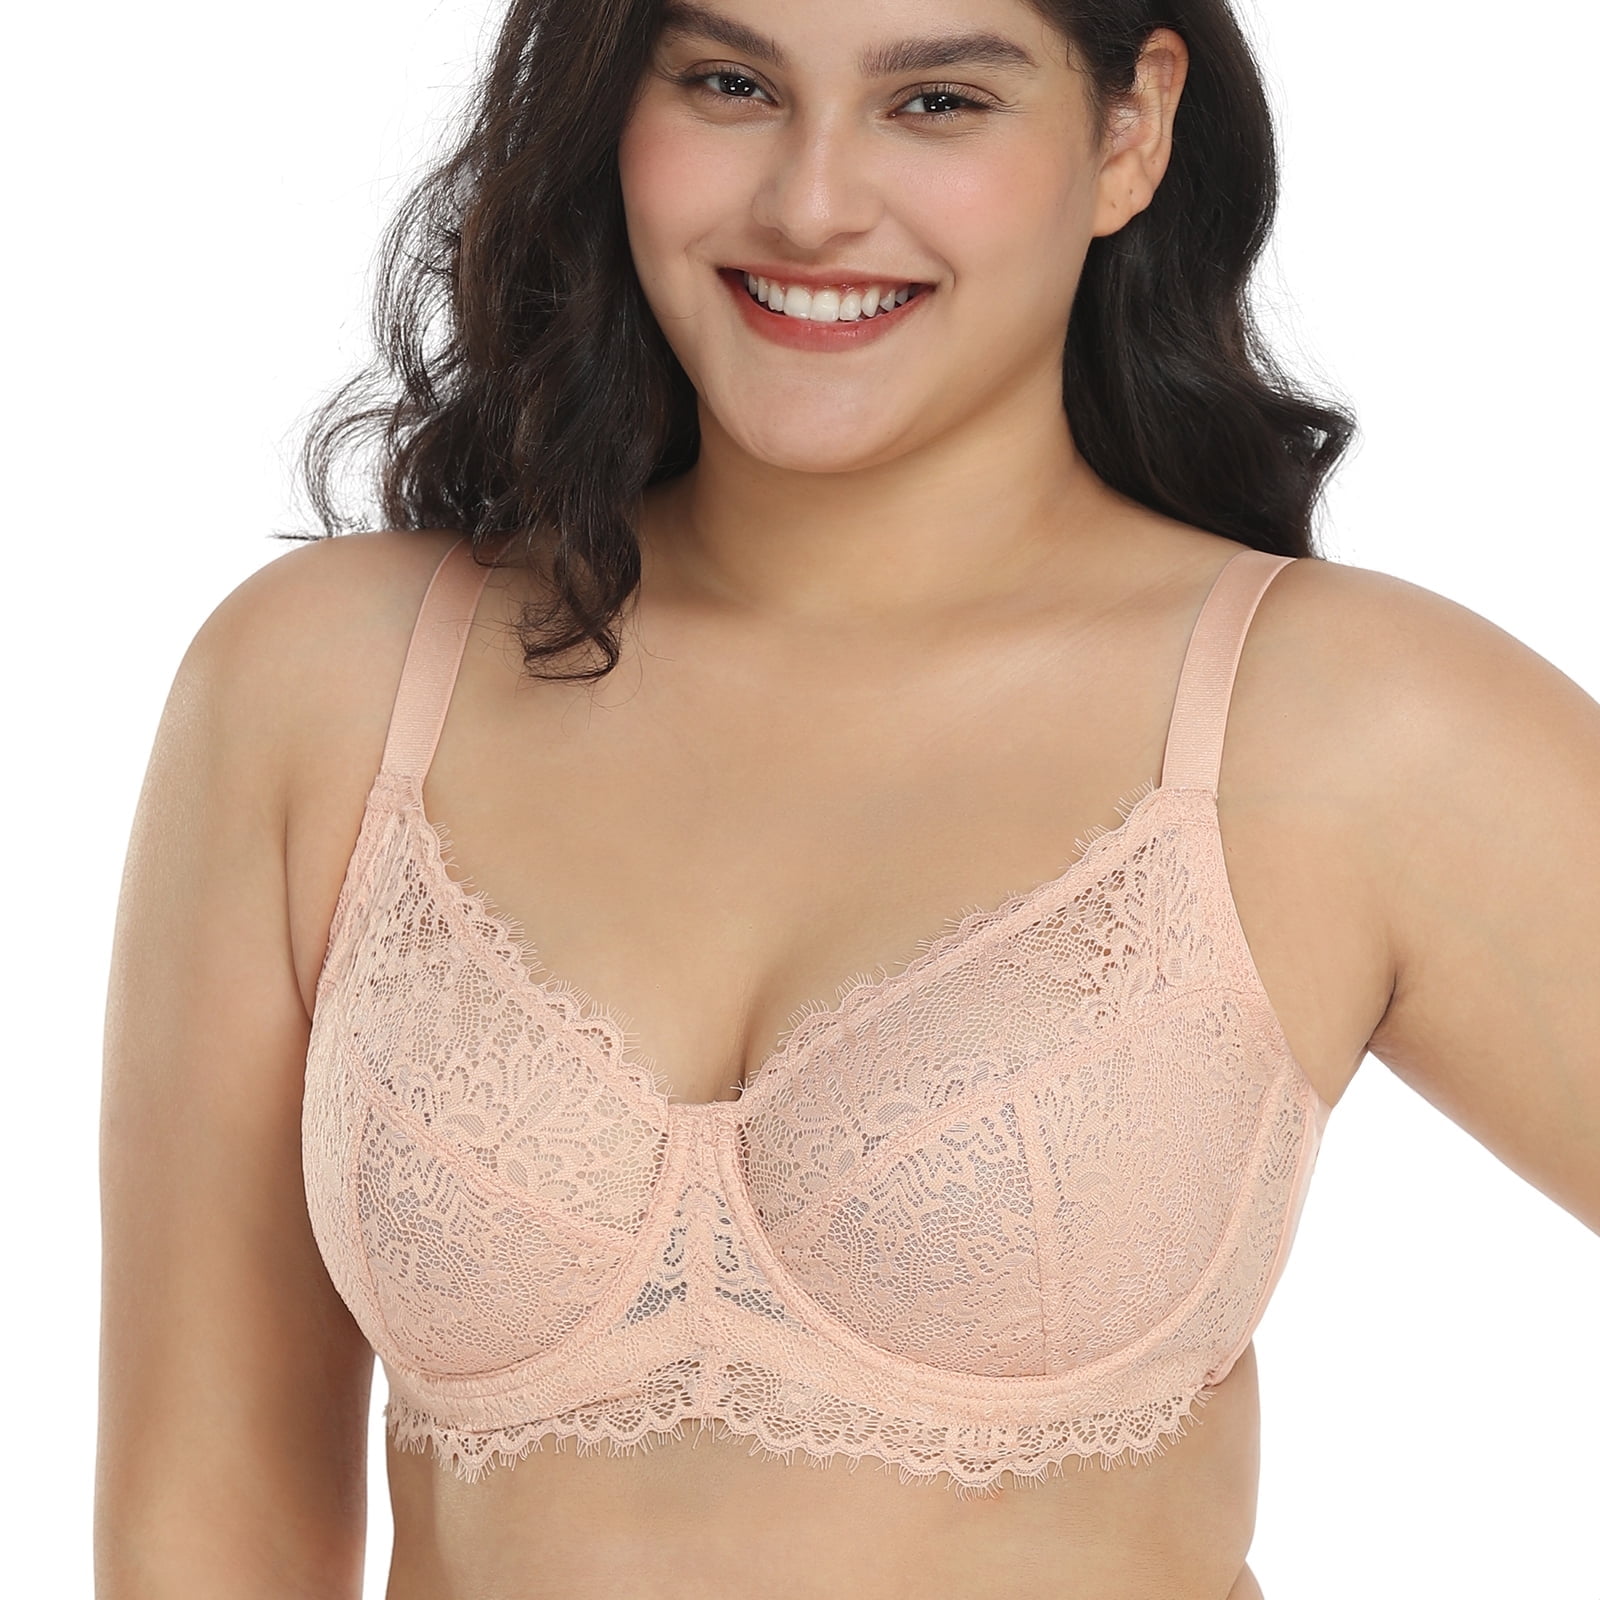 Embroidered Cotton Minmizer Spanx Minimizer Bra For Women Plus Size 1053A,  Comfortable Lingerie In Sizes 36 46 C G 201202 By MiaoErSiDai From Dou01,  $13.39